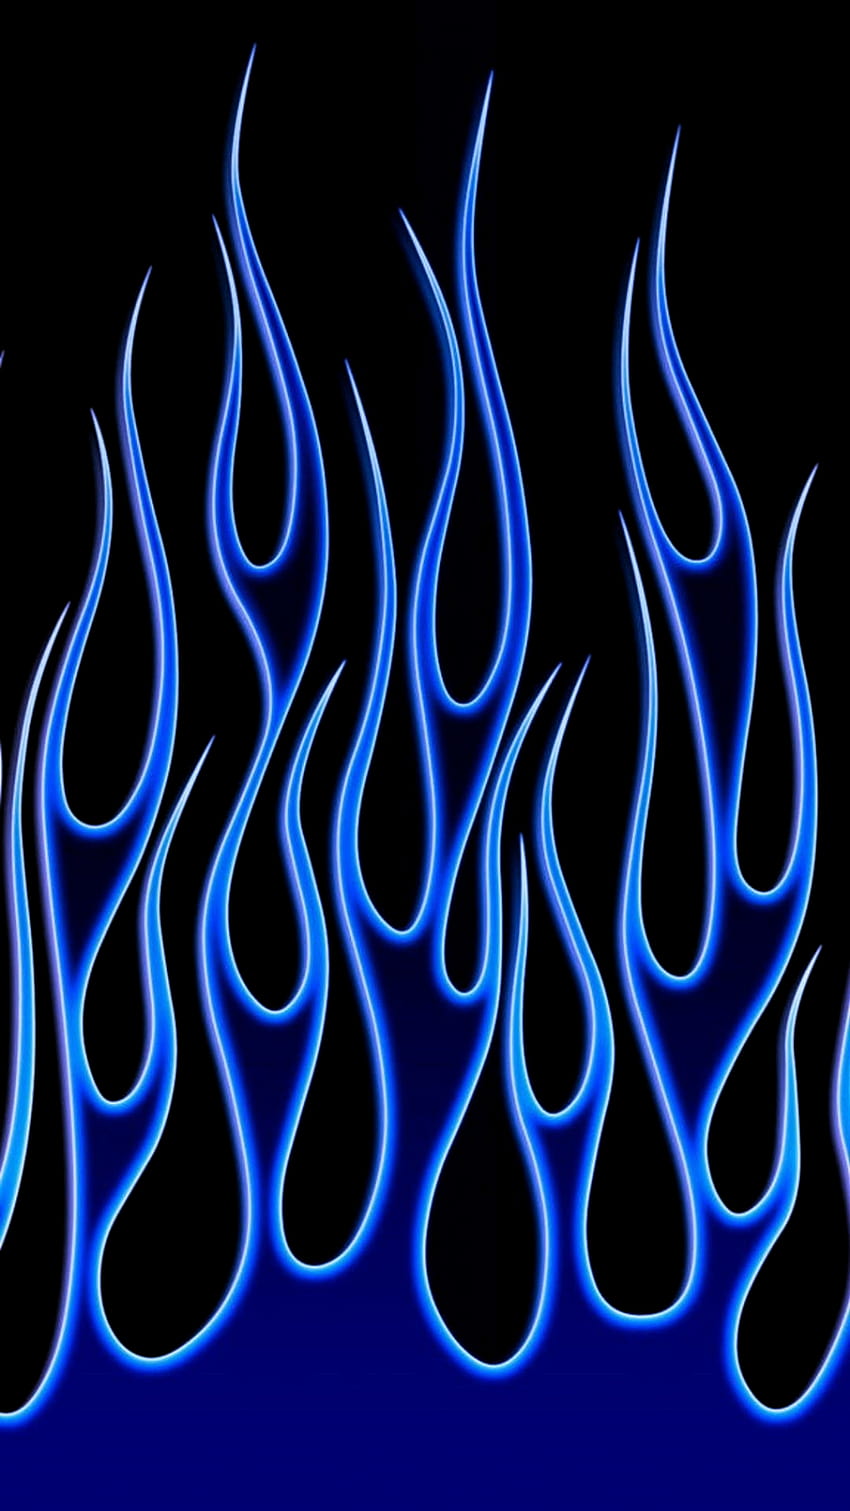 A blue flame background with black - Flames